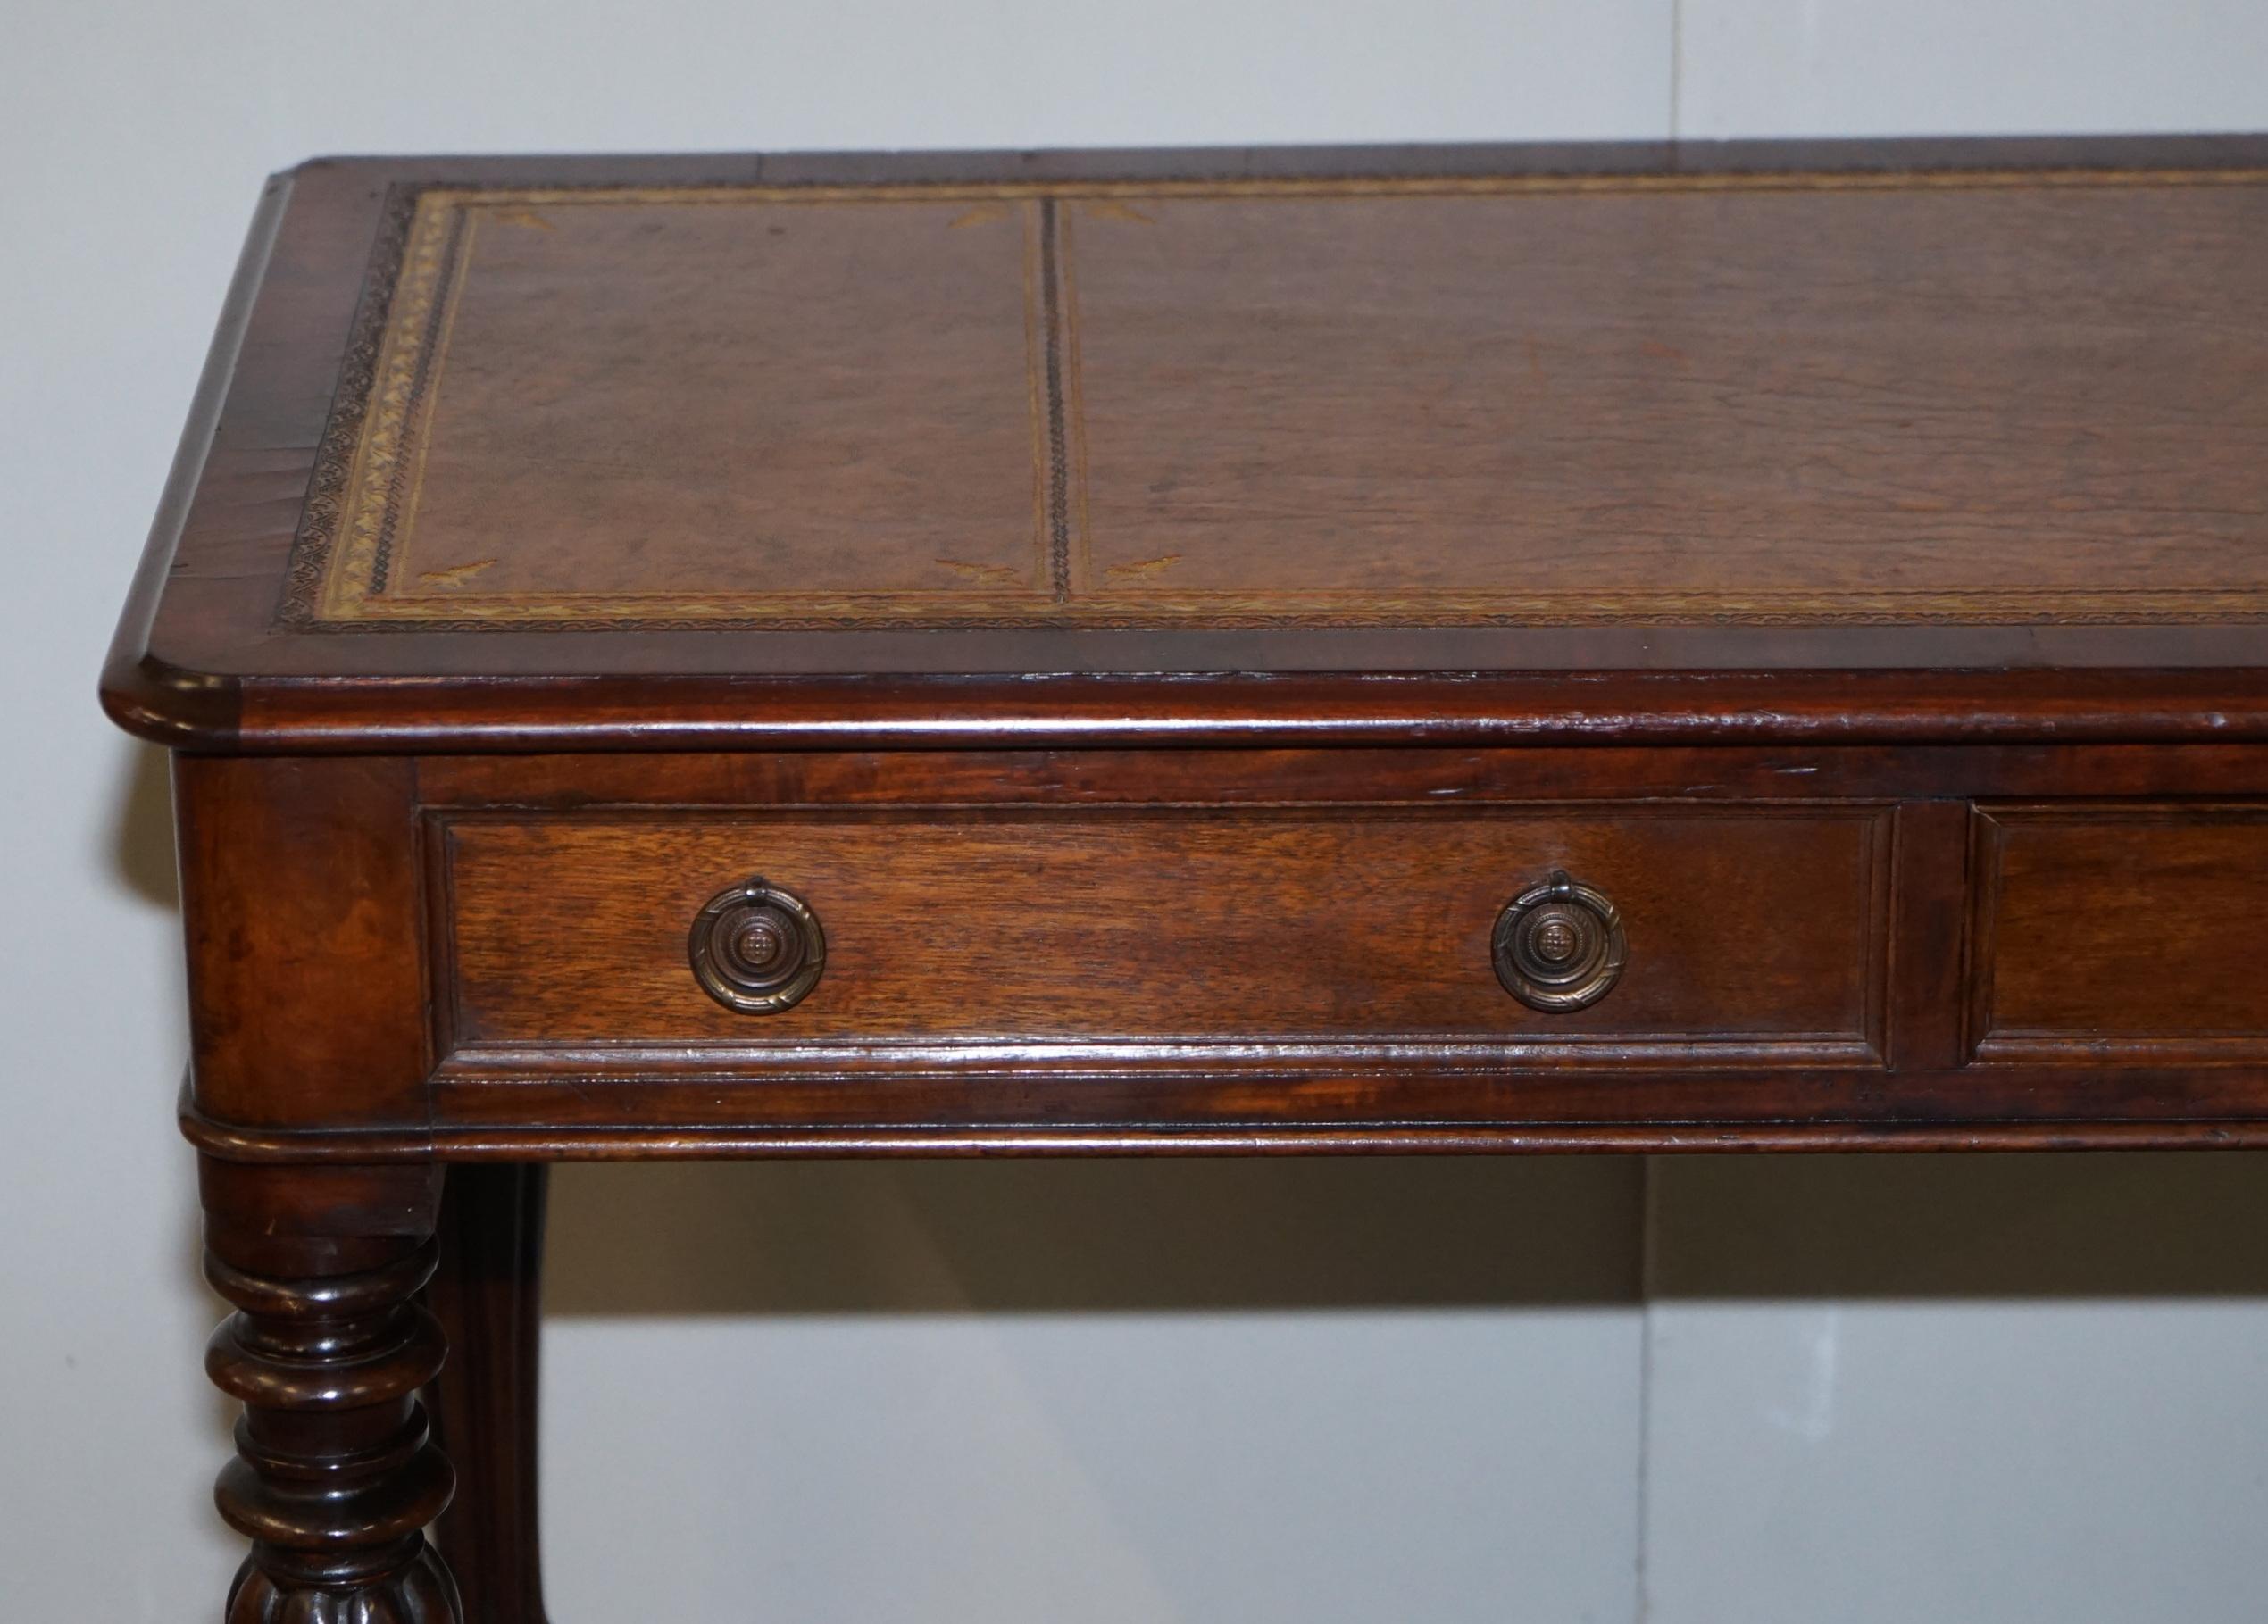 Hand-Crafted Stunning Victorian Library Writing Table or Desk Brown Leather Top Gillows Legs